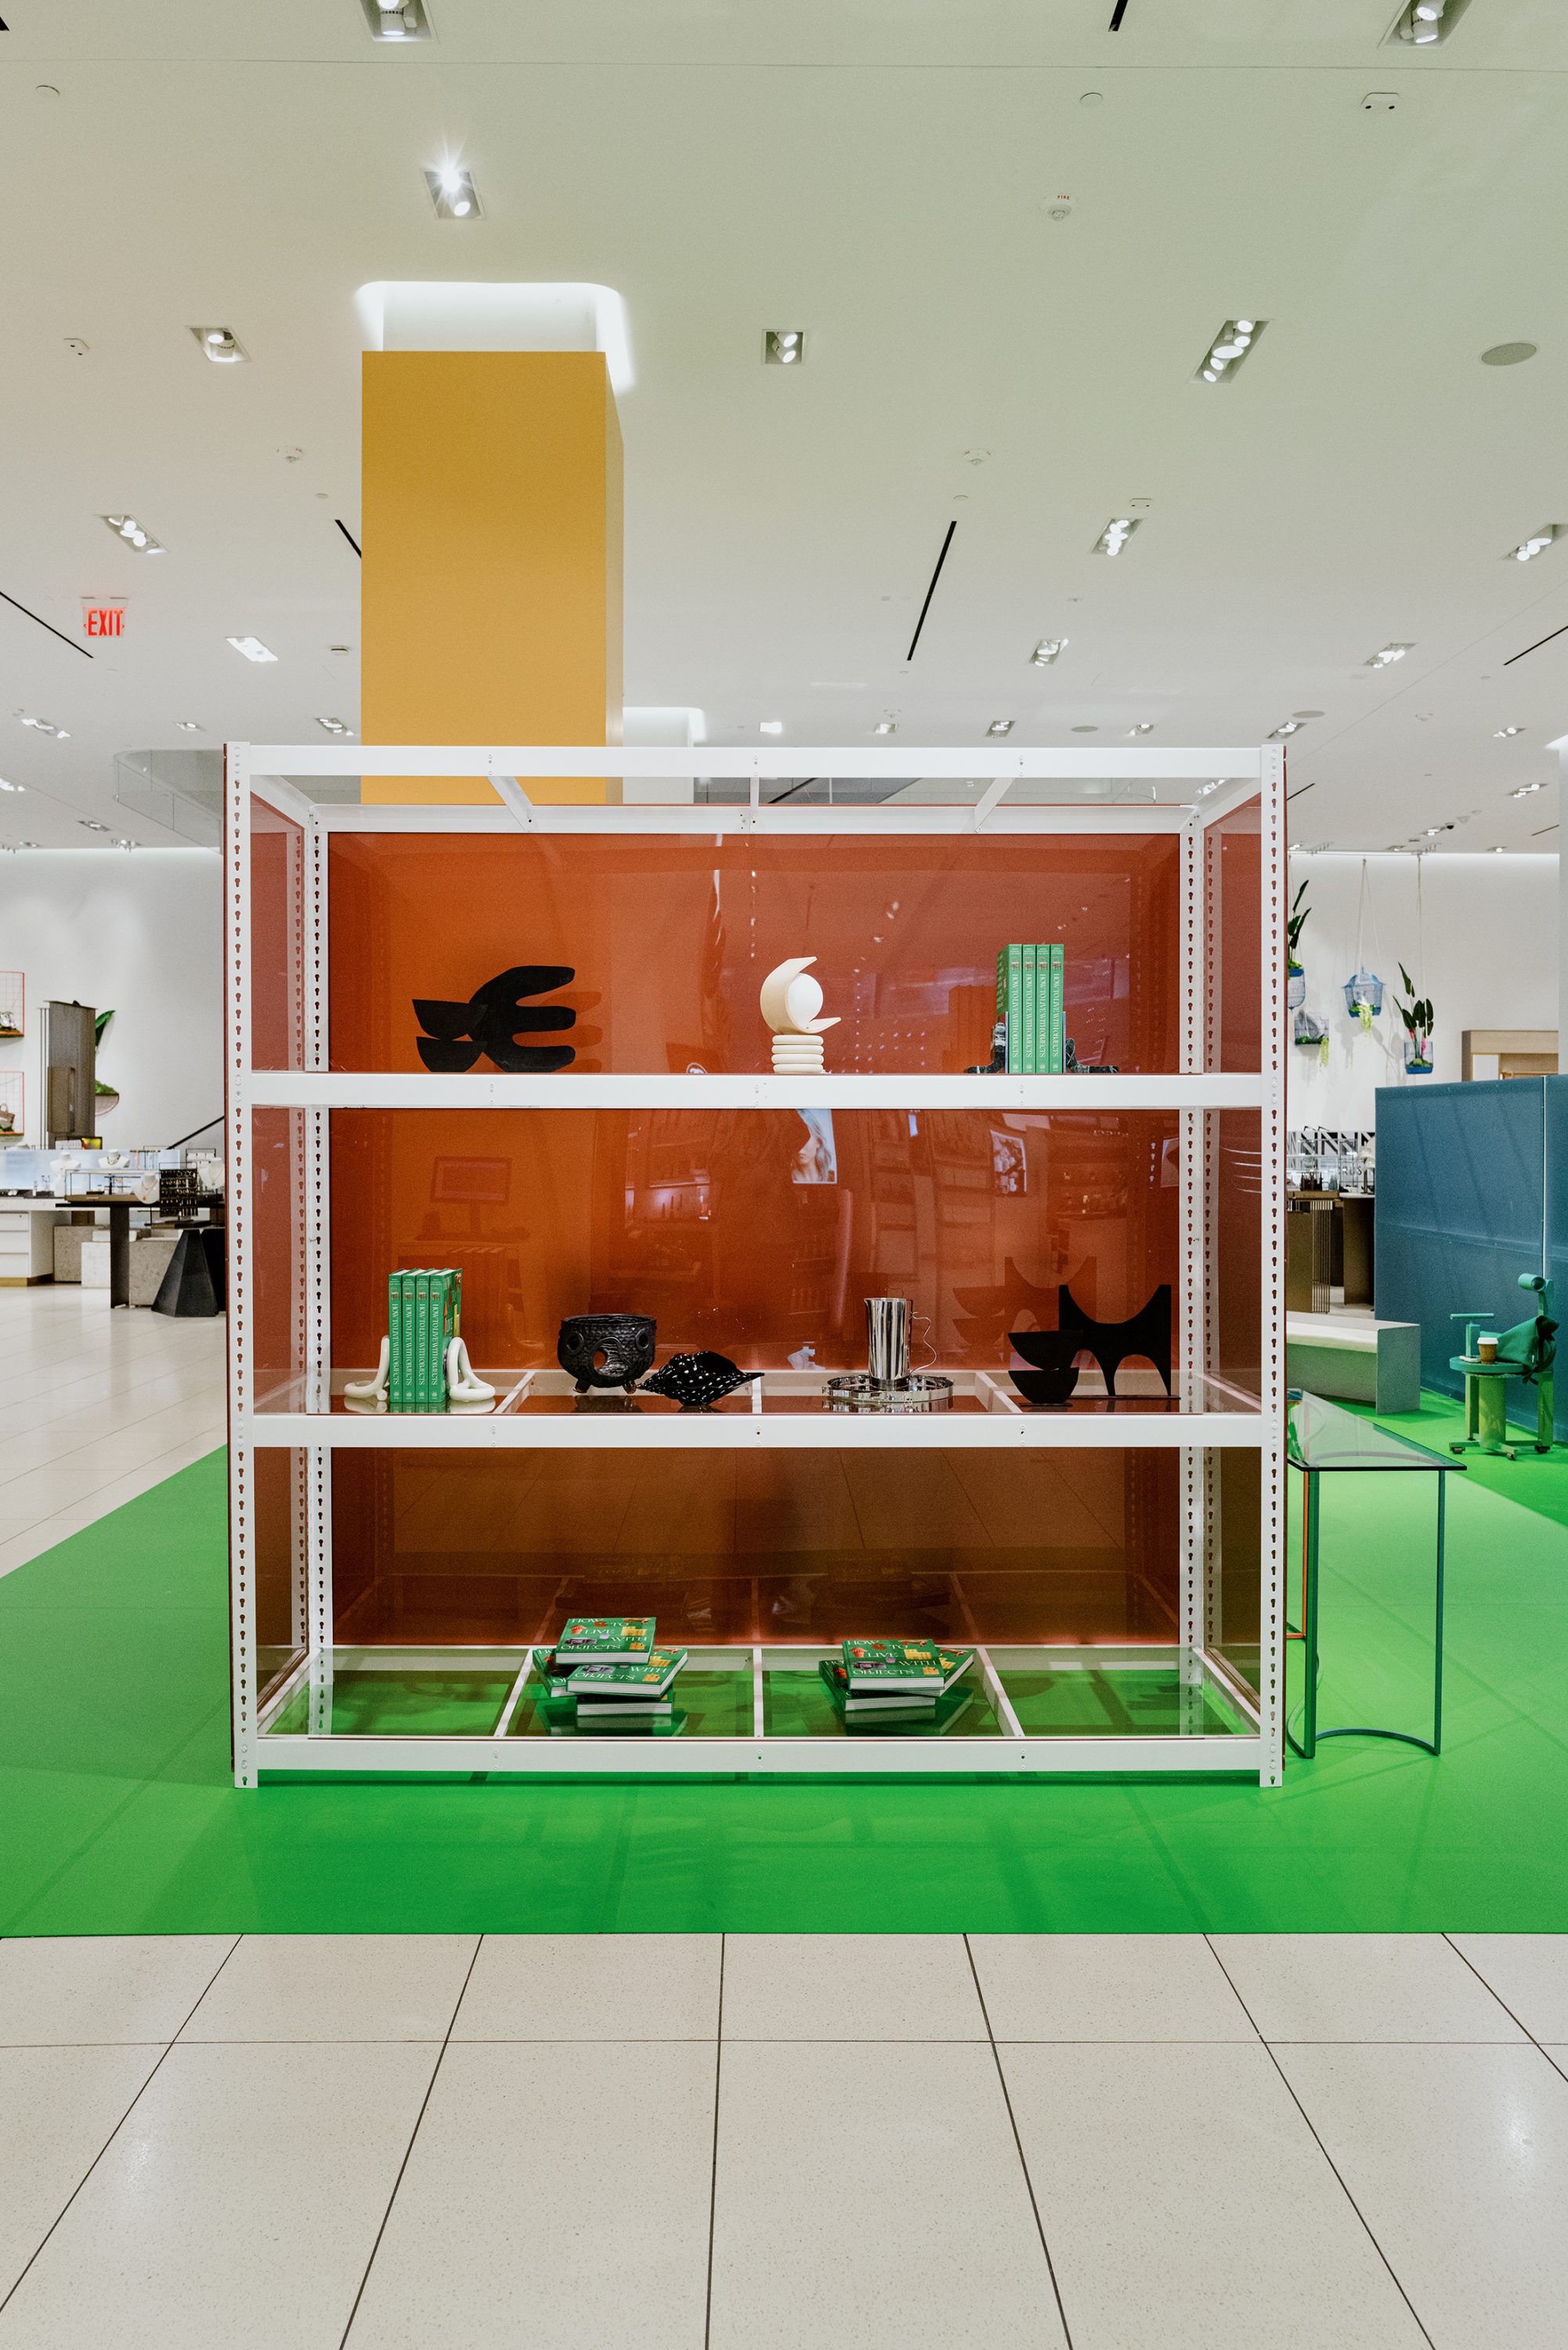 Pop-In at Nordstrom, 2023 - Sight Unseen